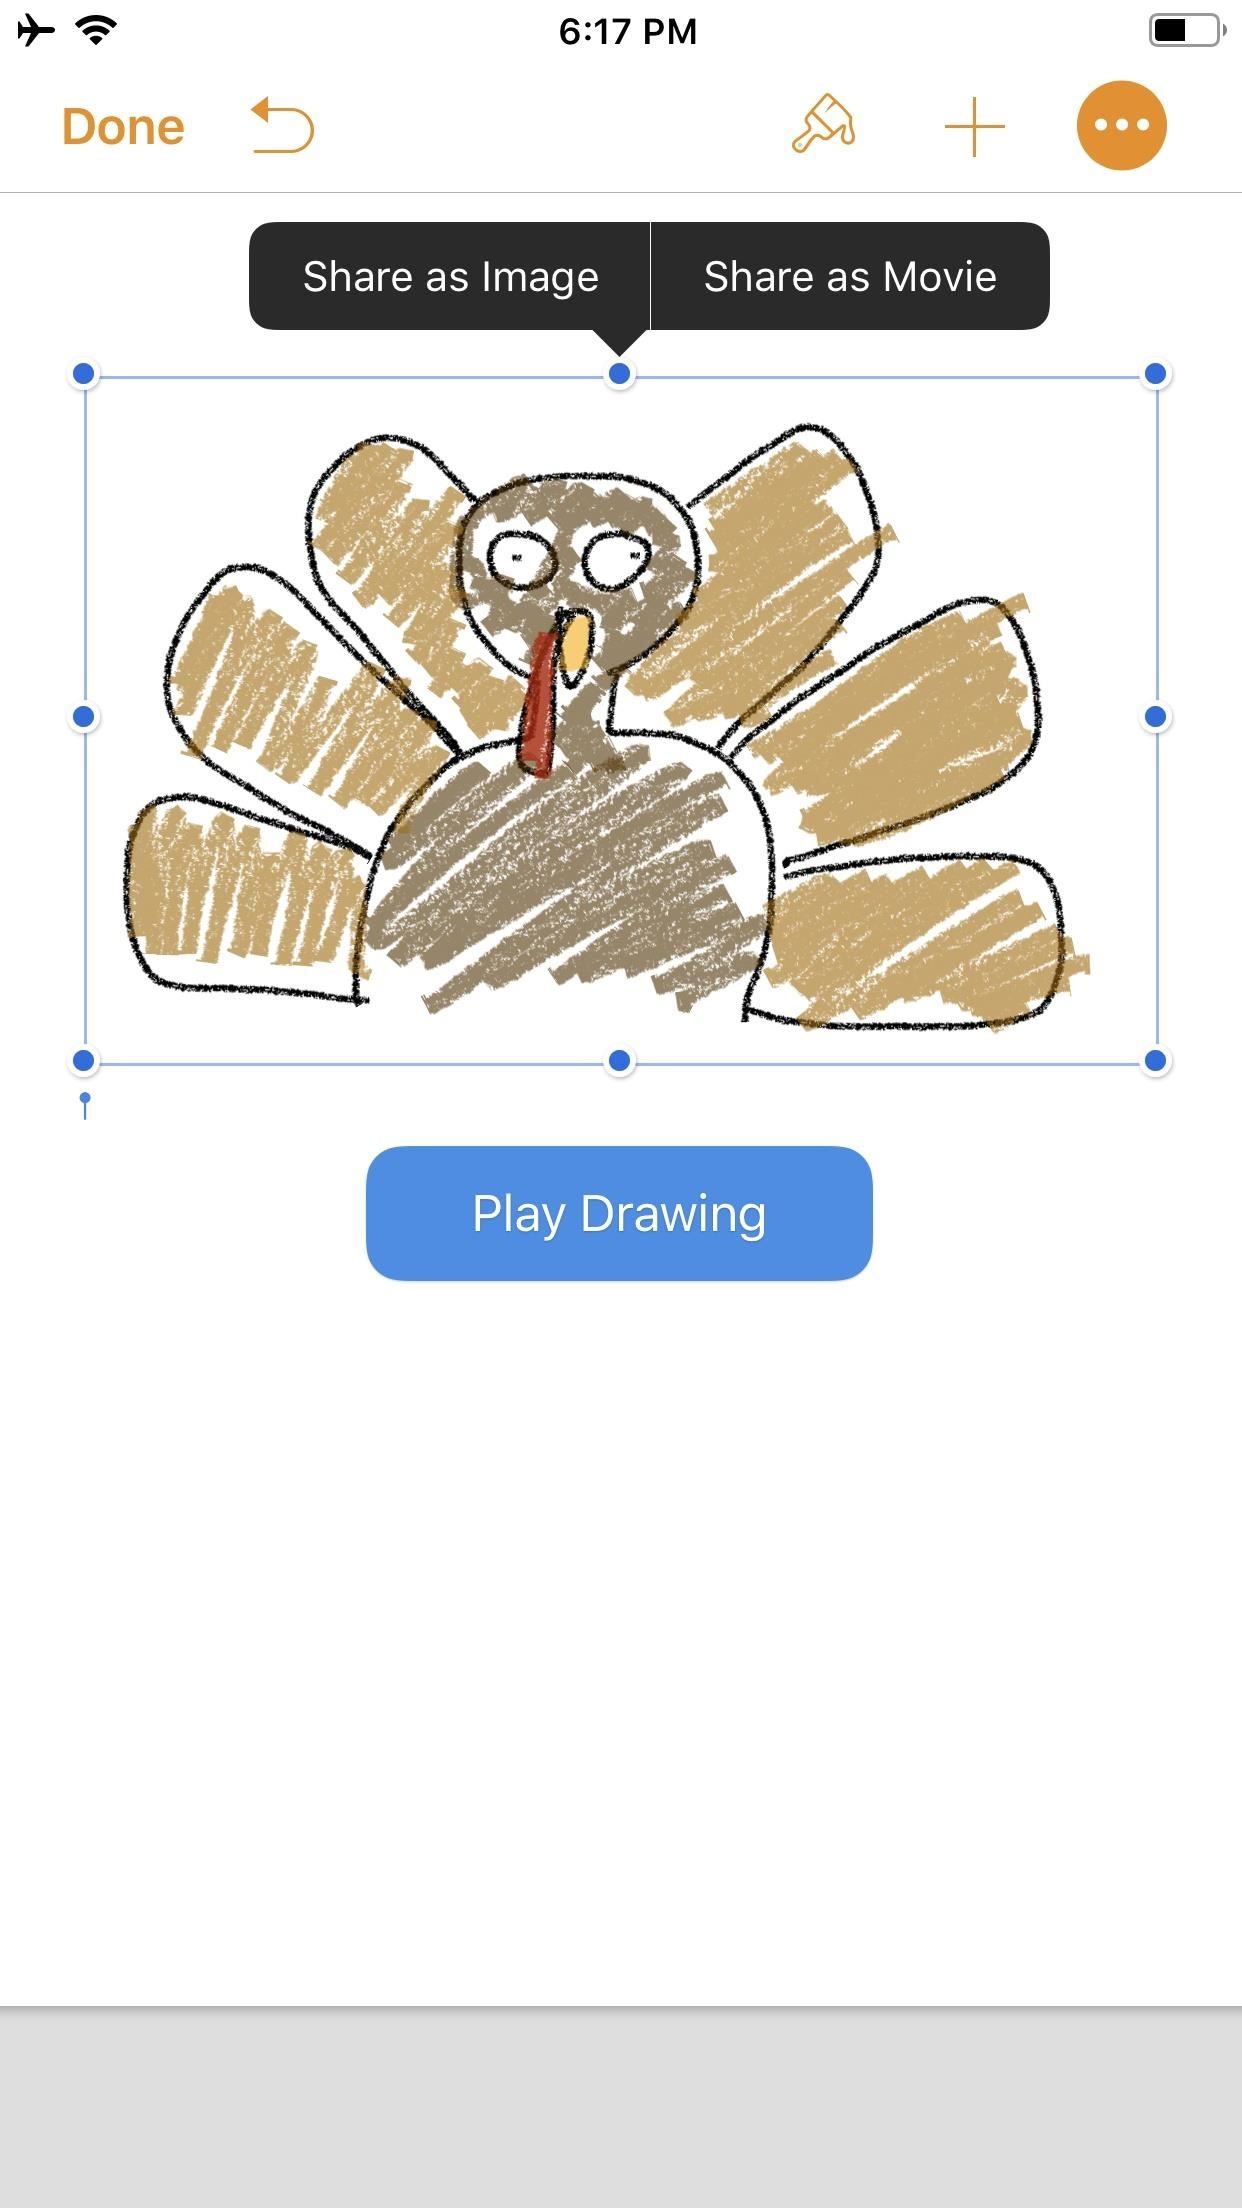 How to Animate & Share Drawings on Your iPhone Without Any Third-Party Apps